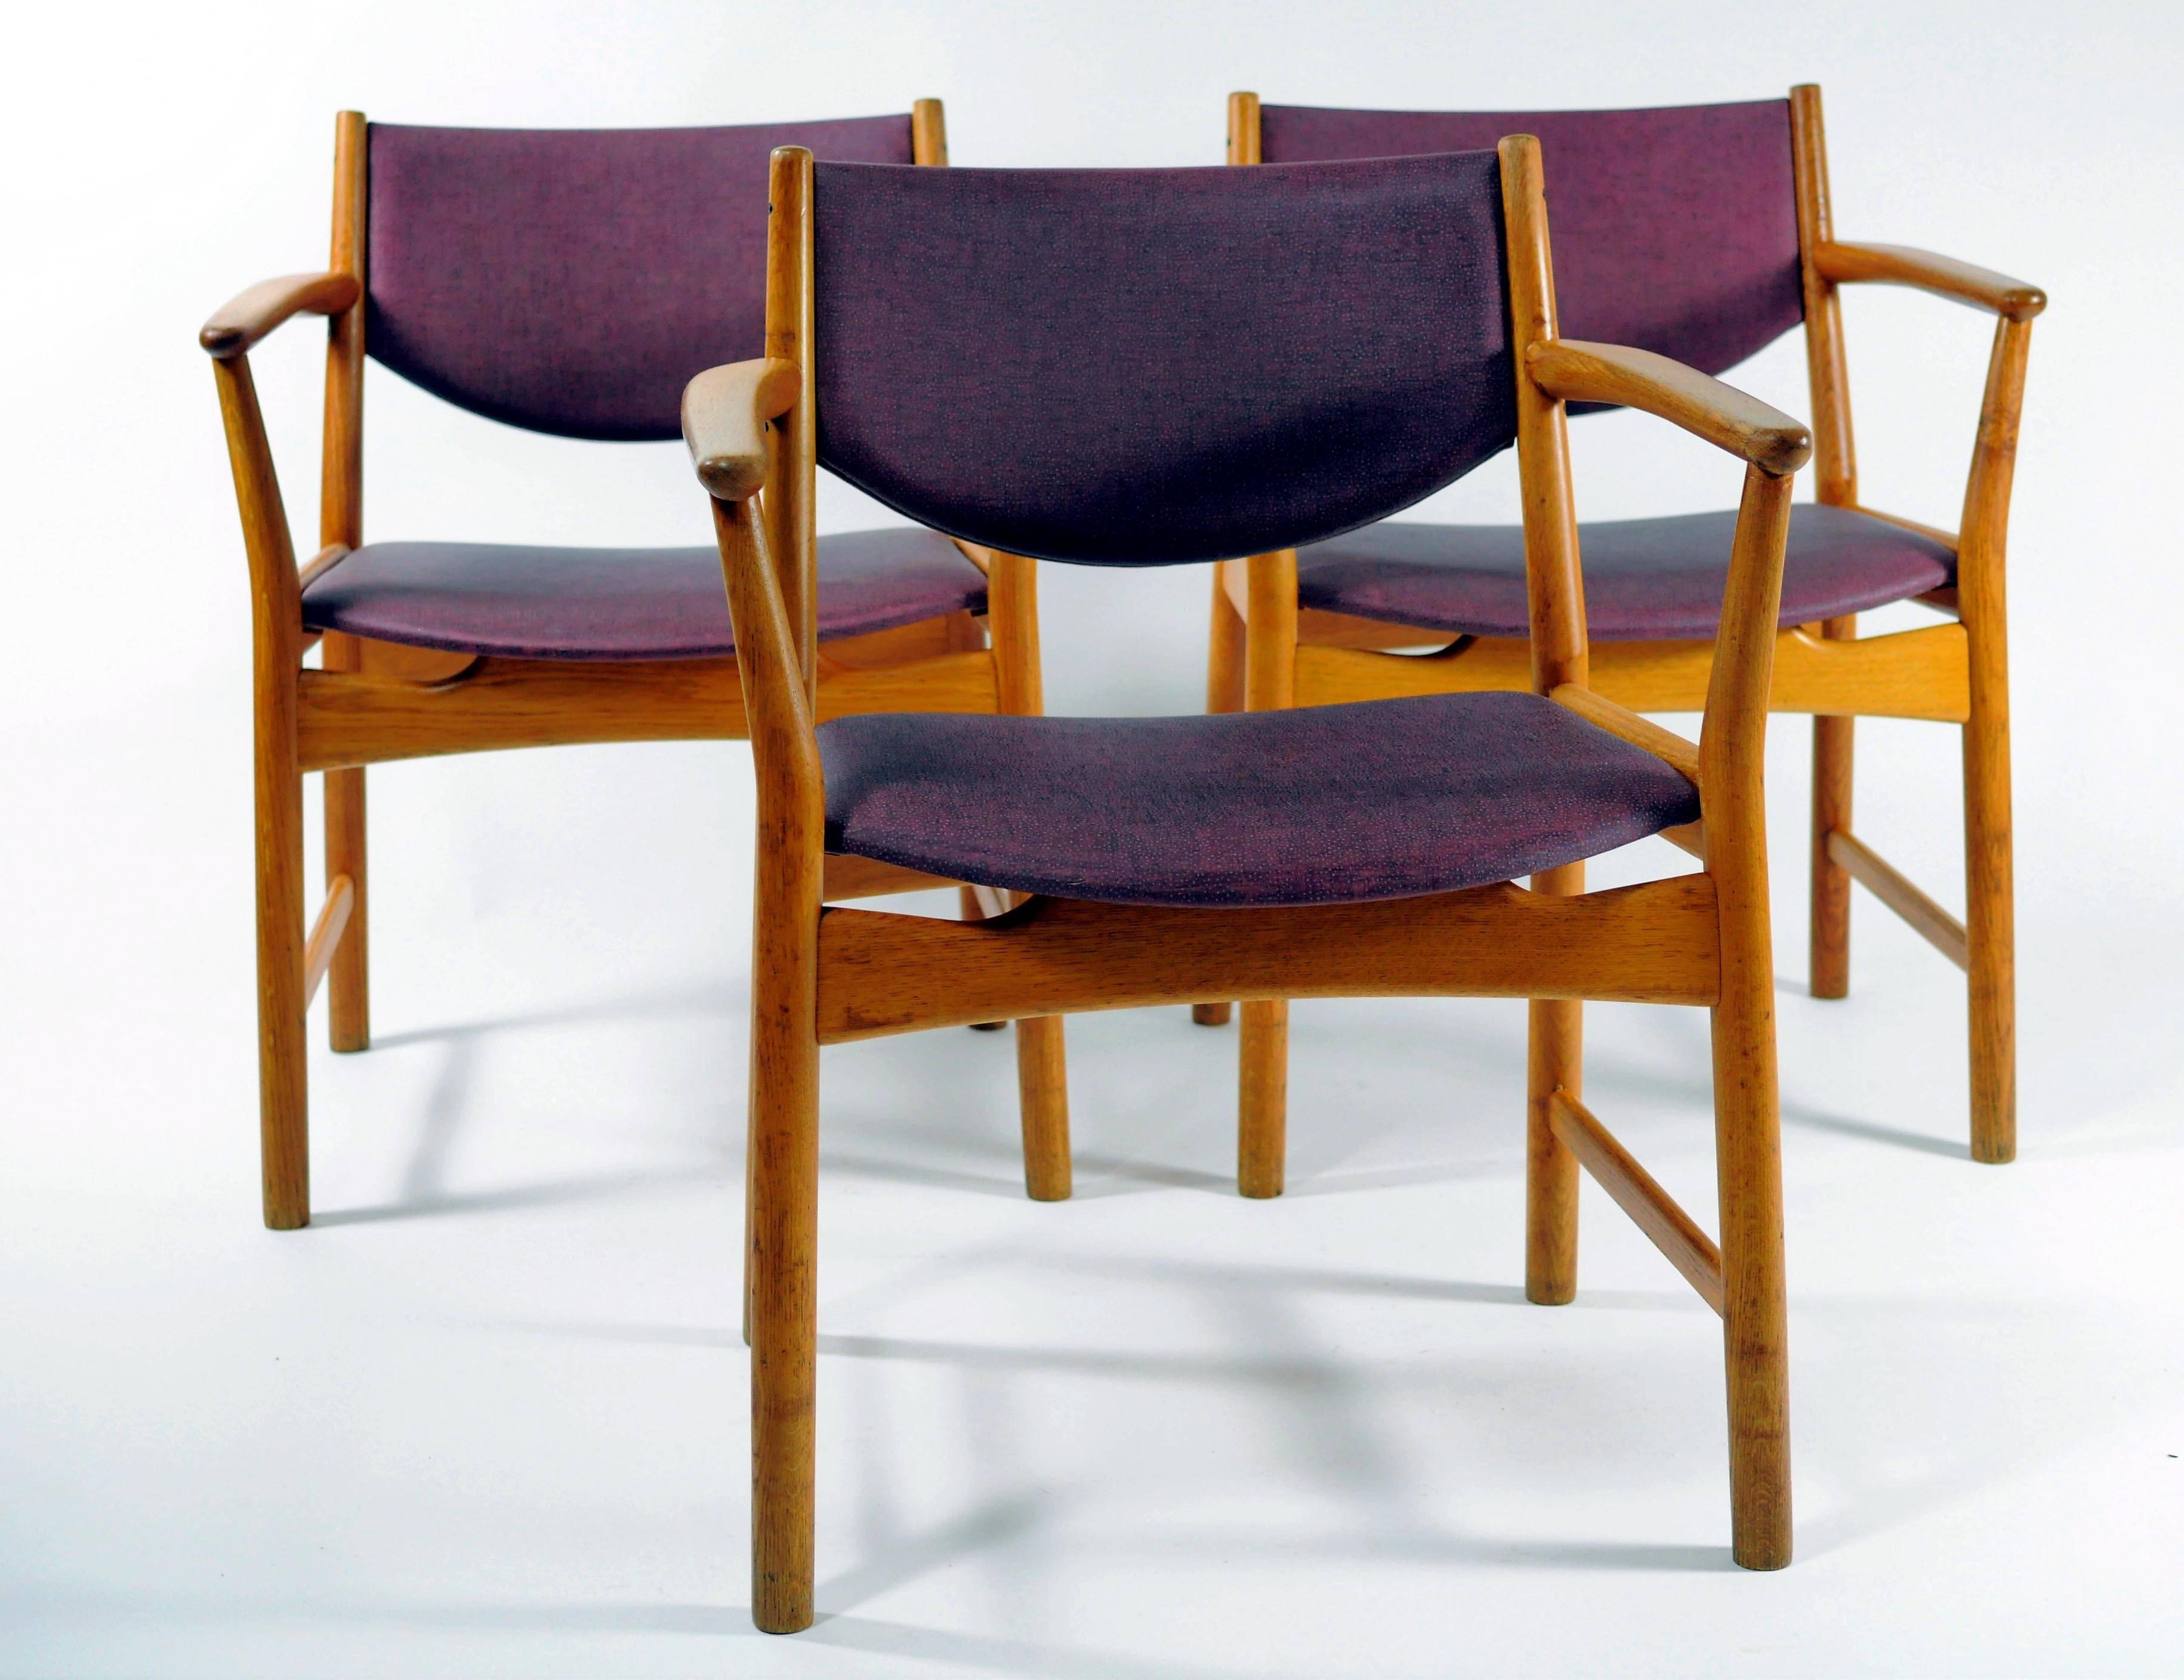 Rare set of three model Elena armchairs in oak designed by Aksel Bender Madsen and Ejnar Larsen imprinted mark from Odense Stolefabrik.

The chairs feature a solid frame in oak with elegant lines, angles and curves that give the chairs a powerful